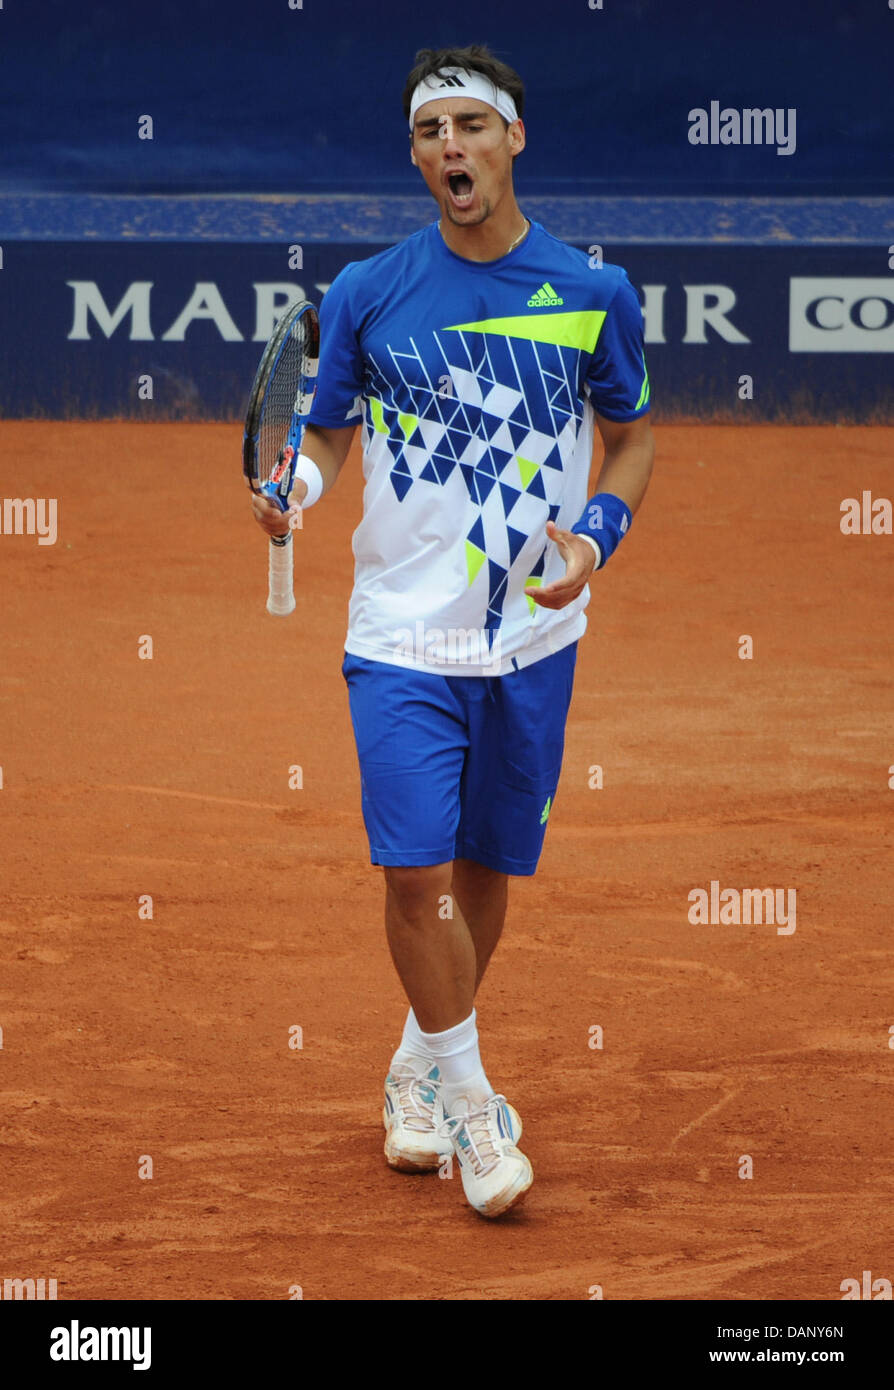 Fabio Fognini from Italy shows anger during the ATP World Tour round of 16 match against Stebe from Germany at the Tennis Club Weissenhof in Stuttgart, Germany, 14 July 2011. Photo: Marijan Murat Stock Photo